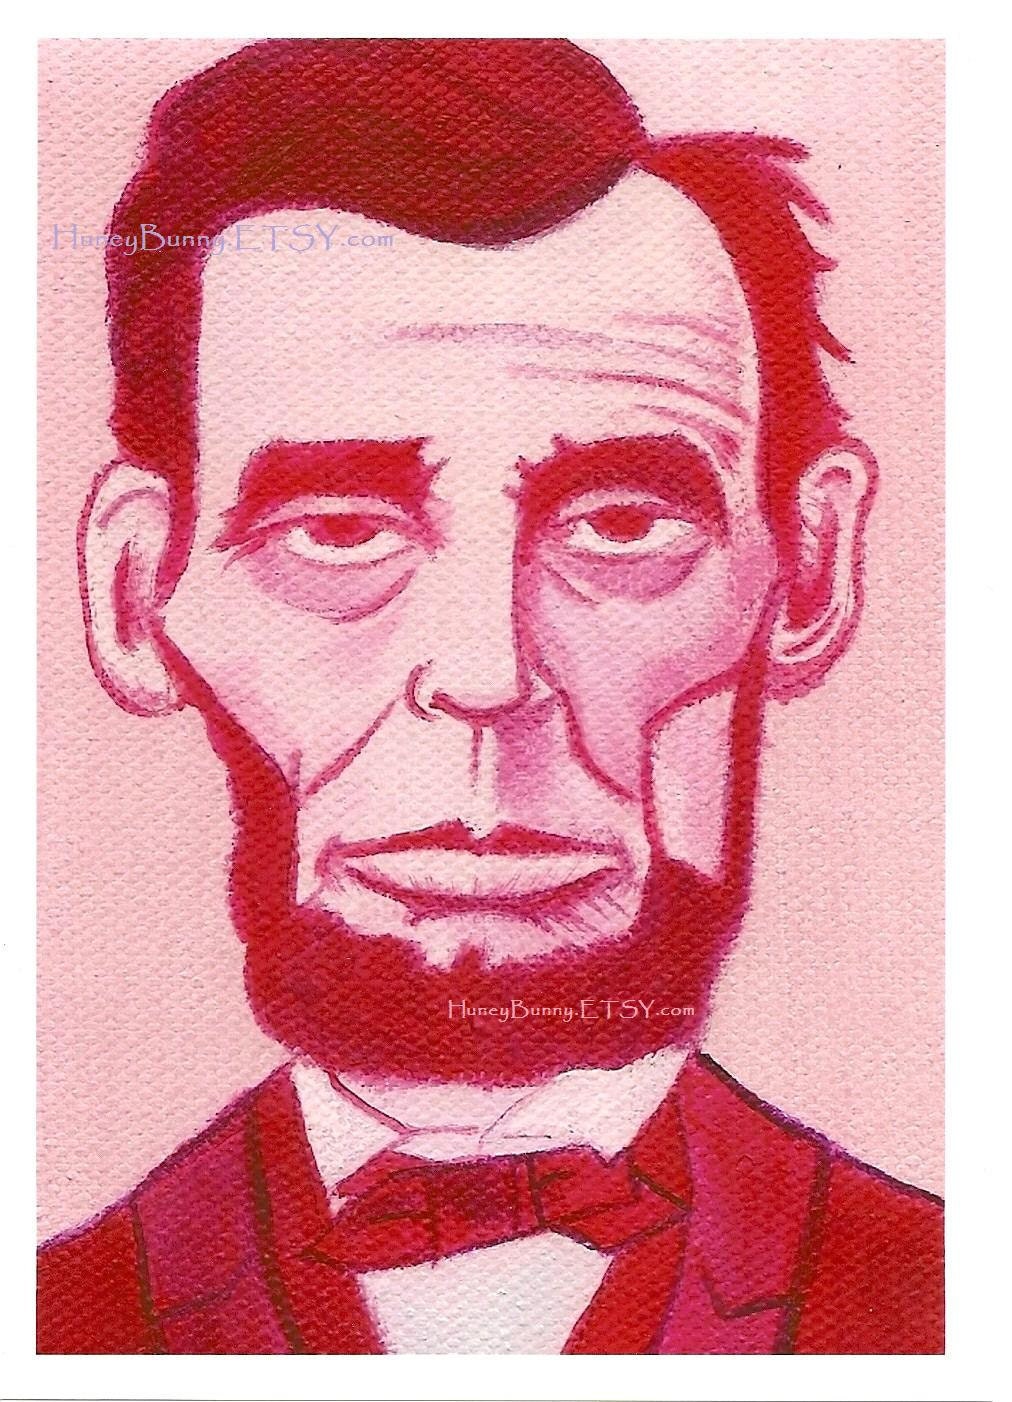 PINK LINCOLN ART Print. 5x7 Print of an Original Oil on Canvas Painting. Whimsical Artwork of Allie Kelley